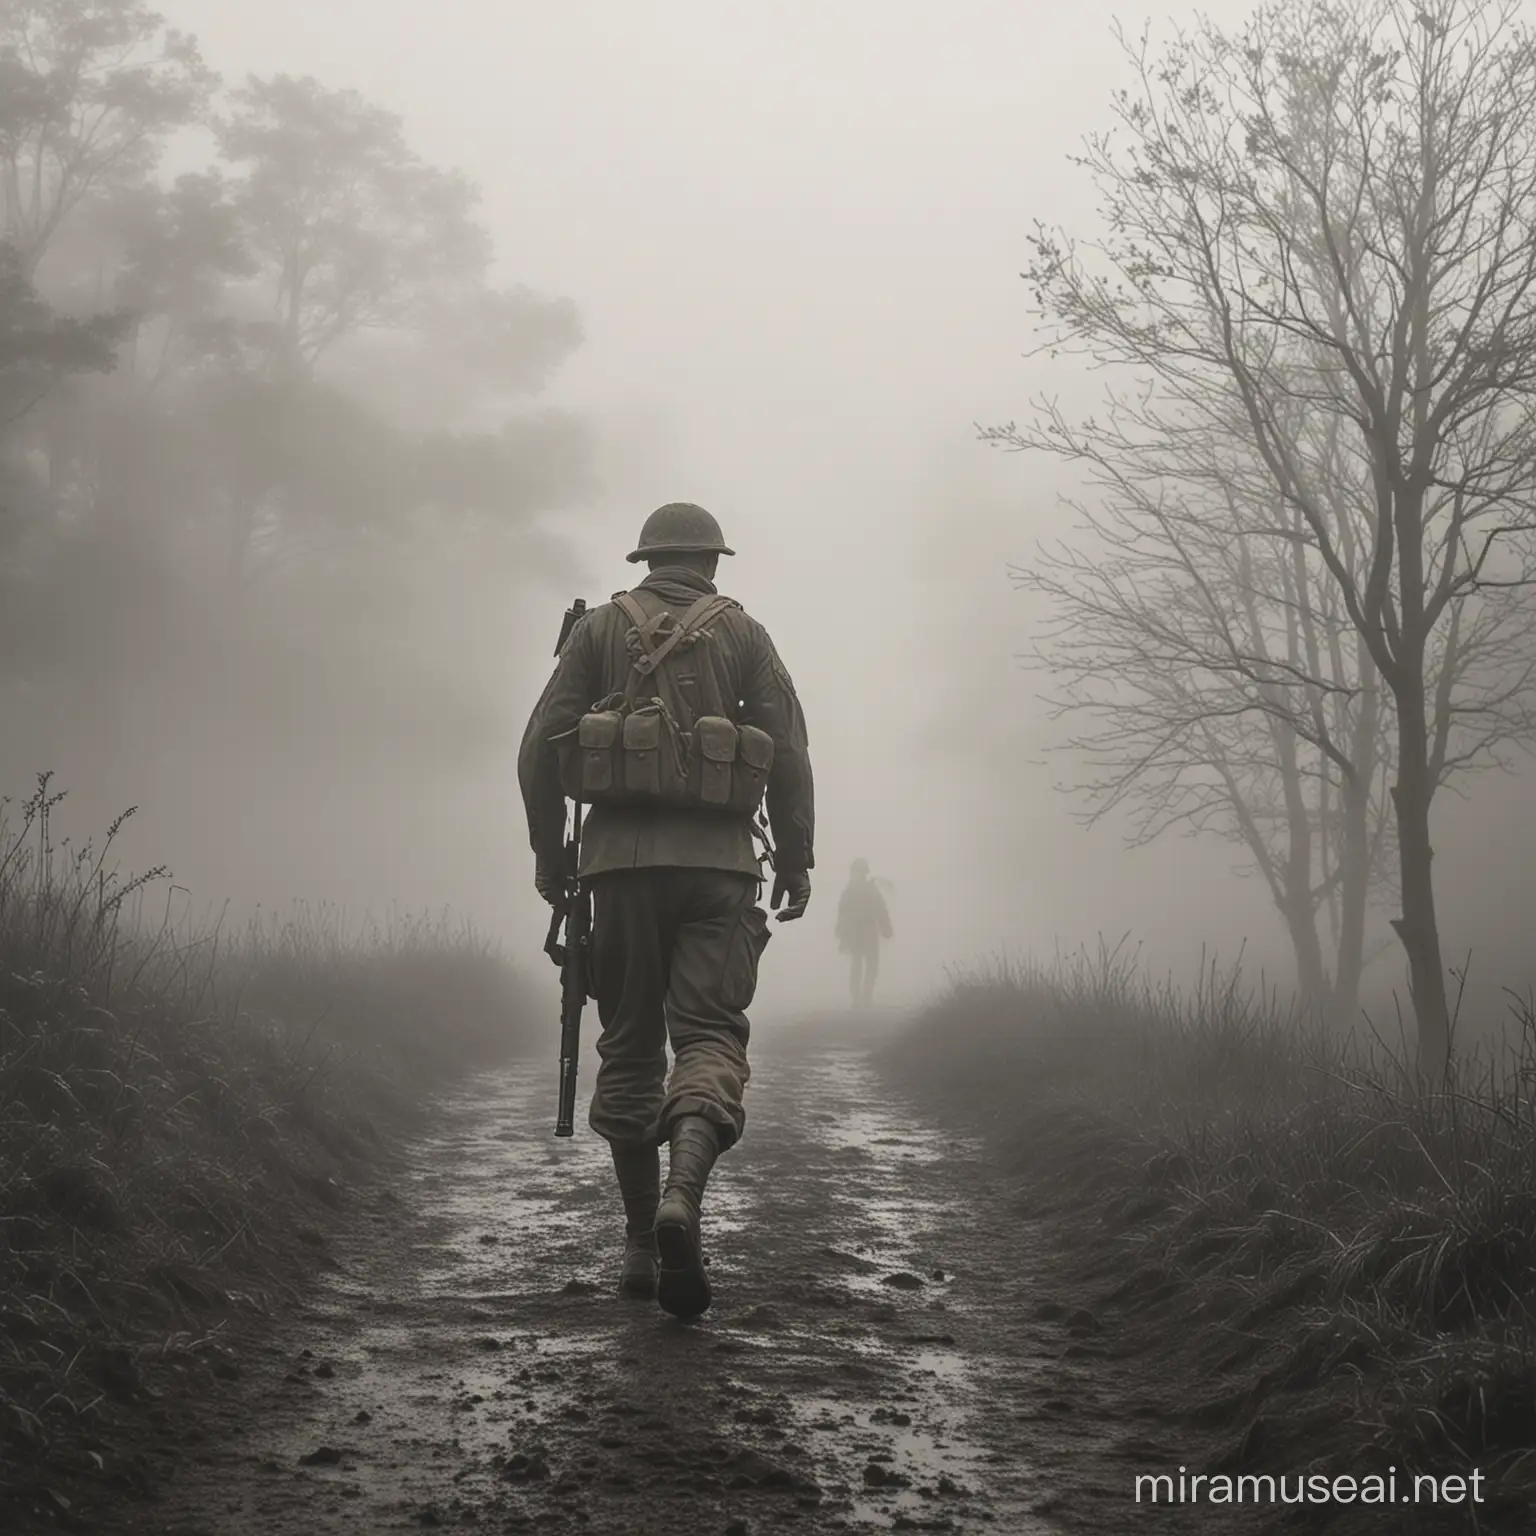 Lonely Soldier Walking into Mystical Mist